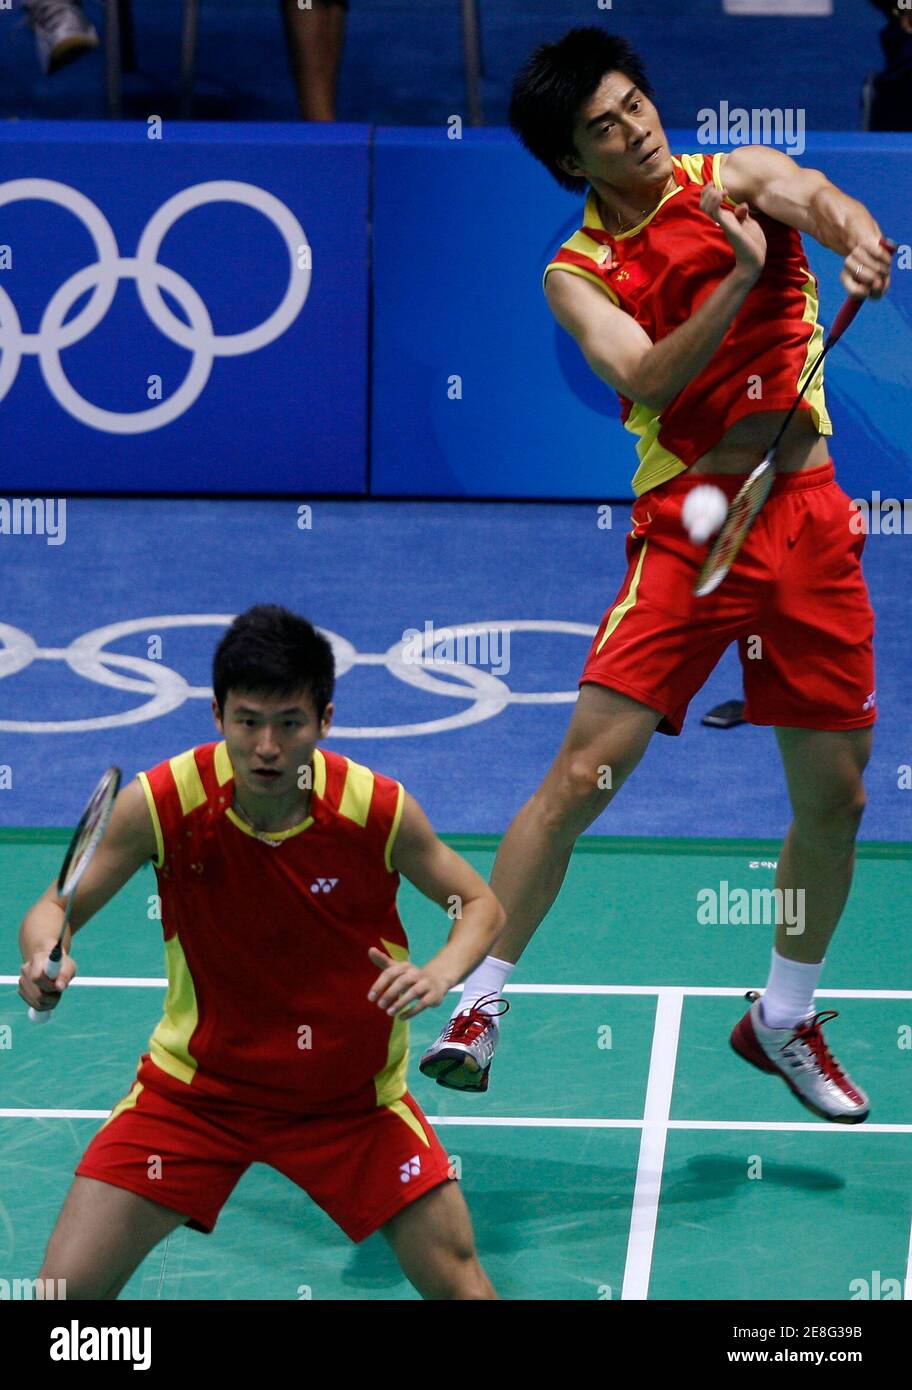 Fu Haifeng (R) and Cai Yun of China compete in their men's doubles quarterfinals badminton match against the U.S. at the Beijing 2008 Olympic Games August 13, 2008.     REUTERS/Beawiharta (CHINA) Stock Photo